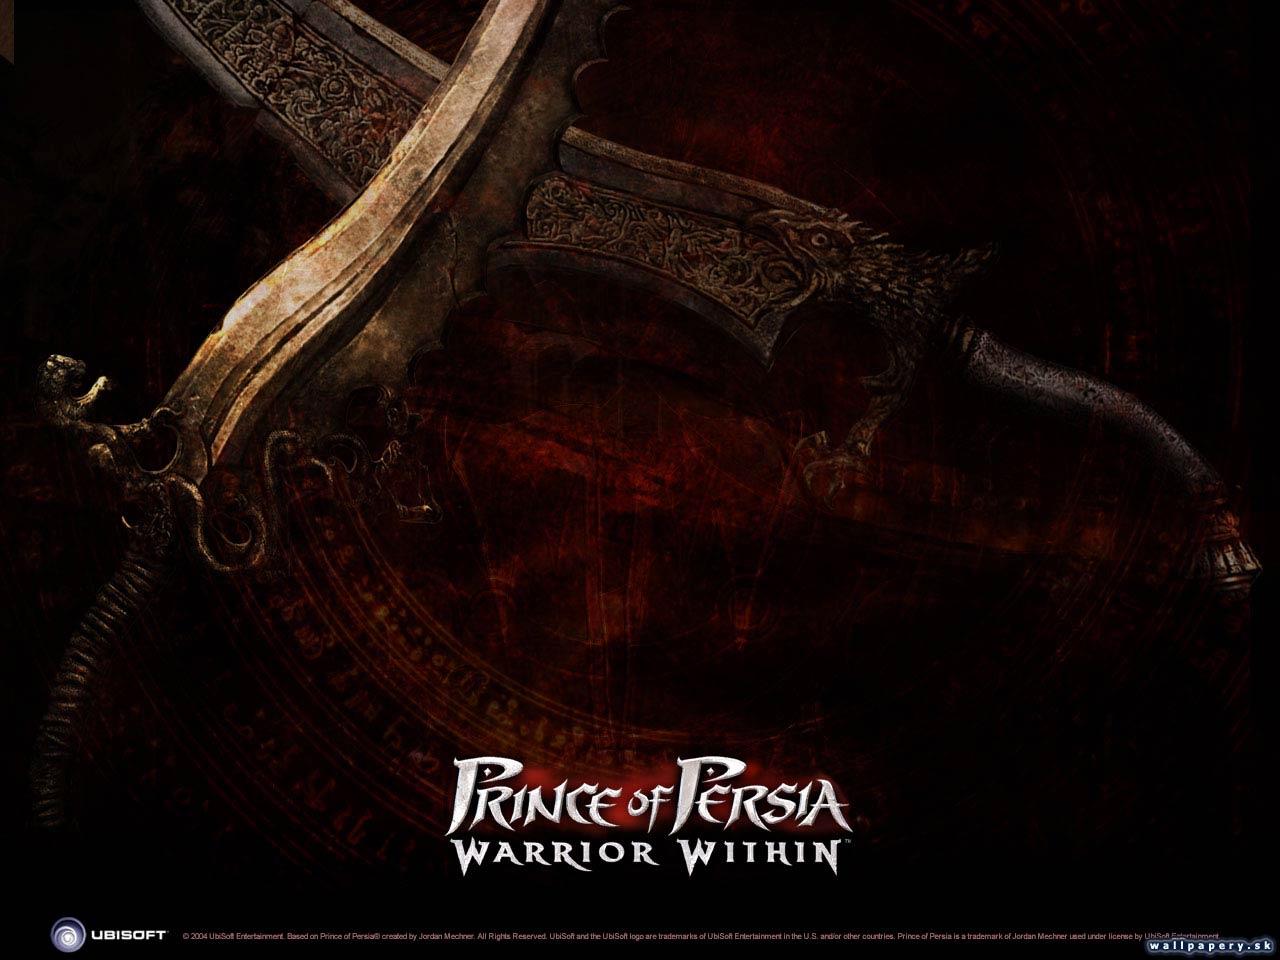 Prince of Persia: Warrior Within - wallpaper 4